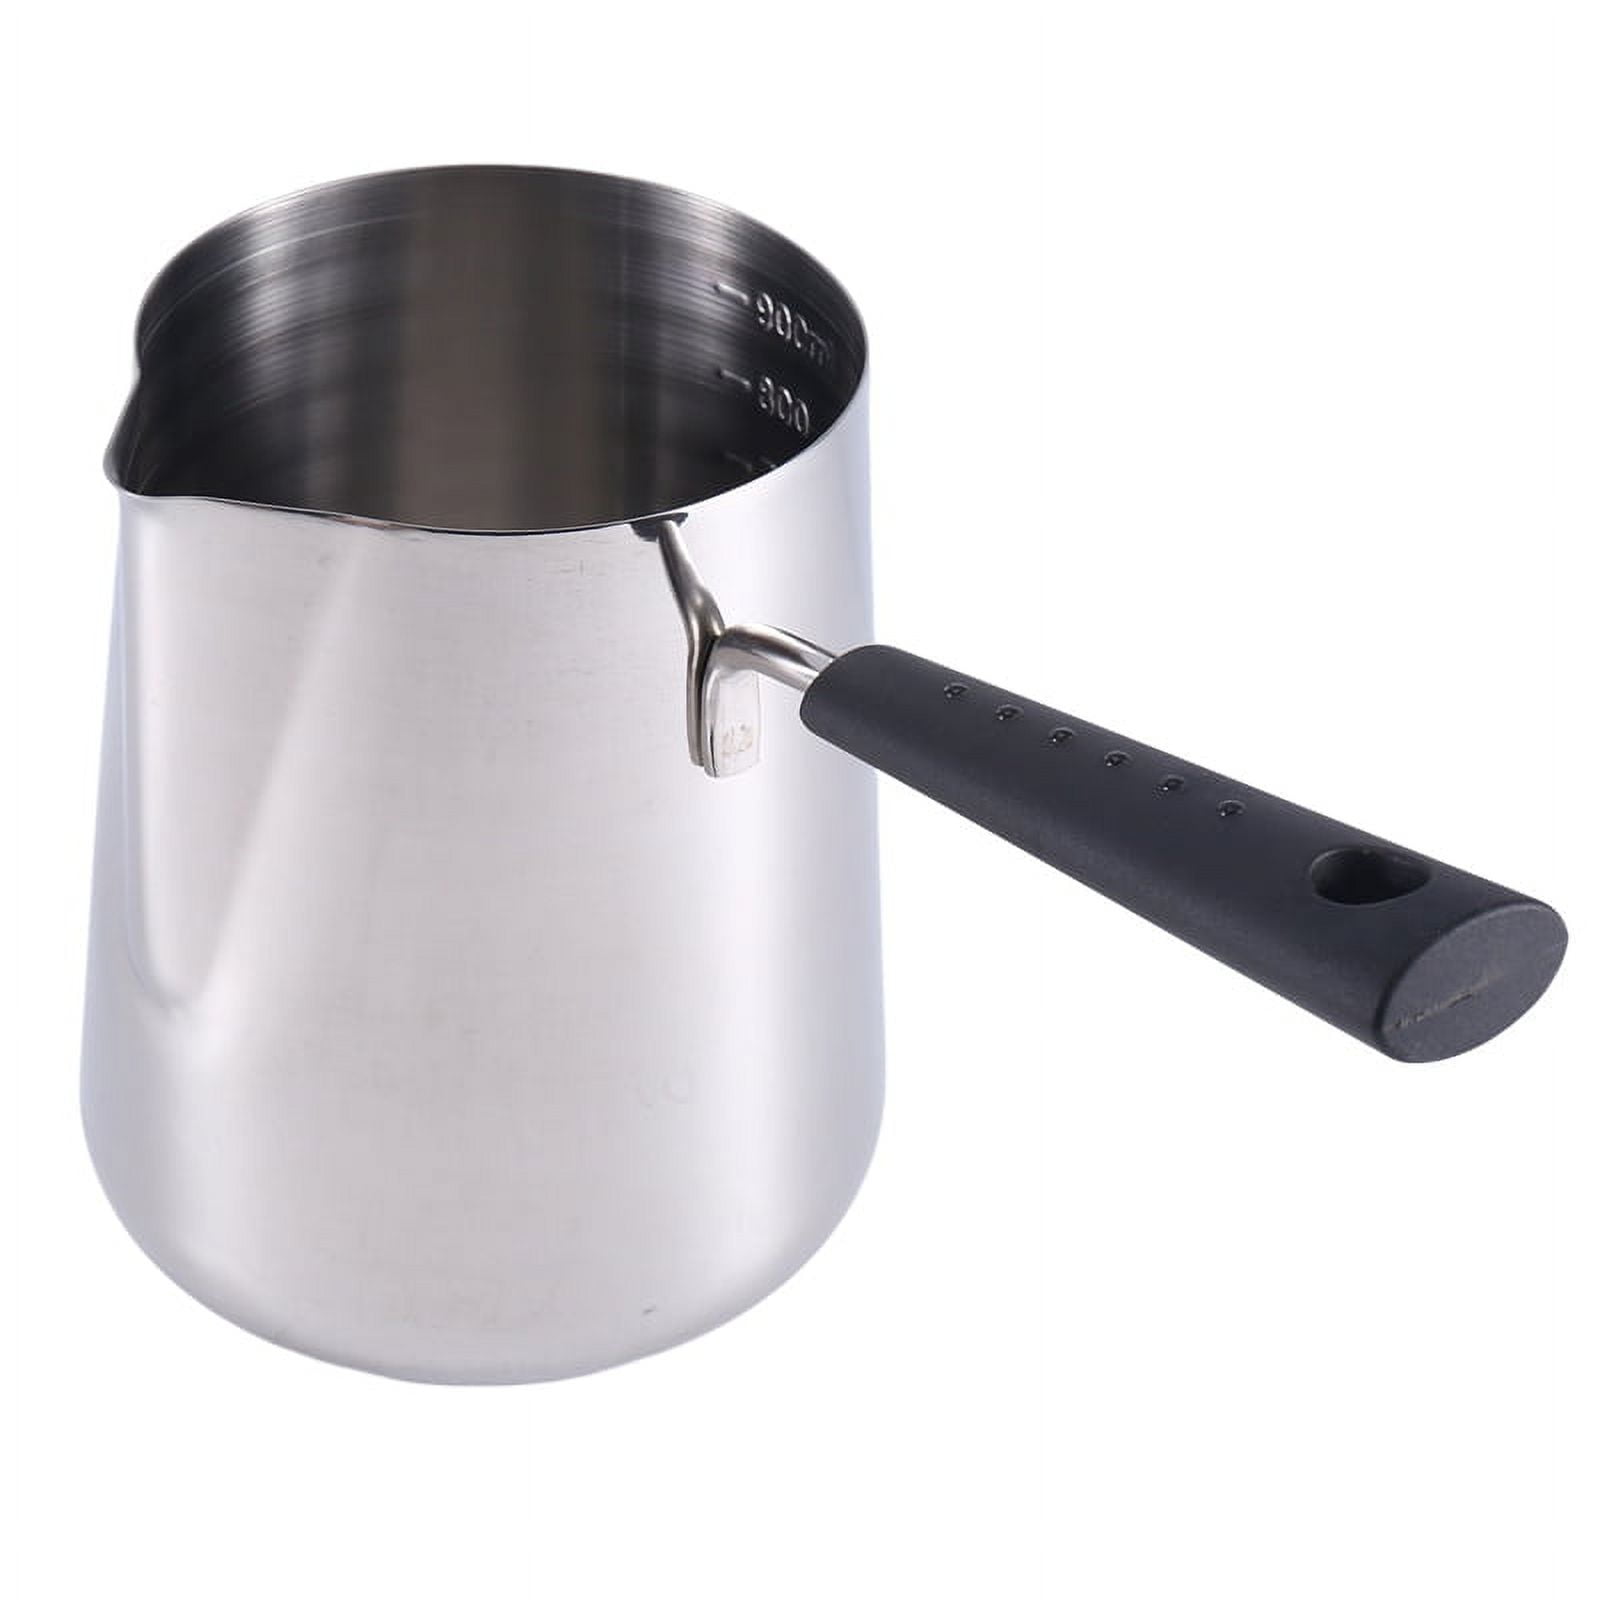 350Ml Milk Butter Warmer Pot, Turkish Coffee Pot, Stainless Steel Stovetop  Melting Pot with Spout for Tea,Heating 